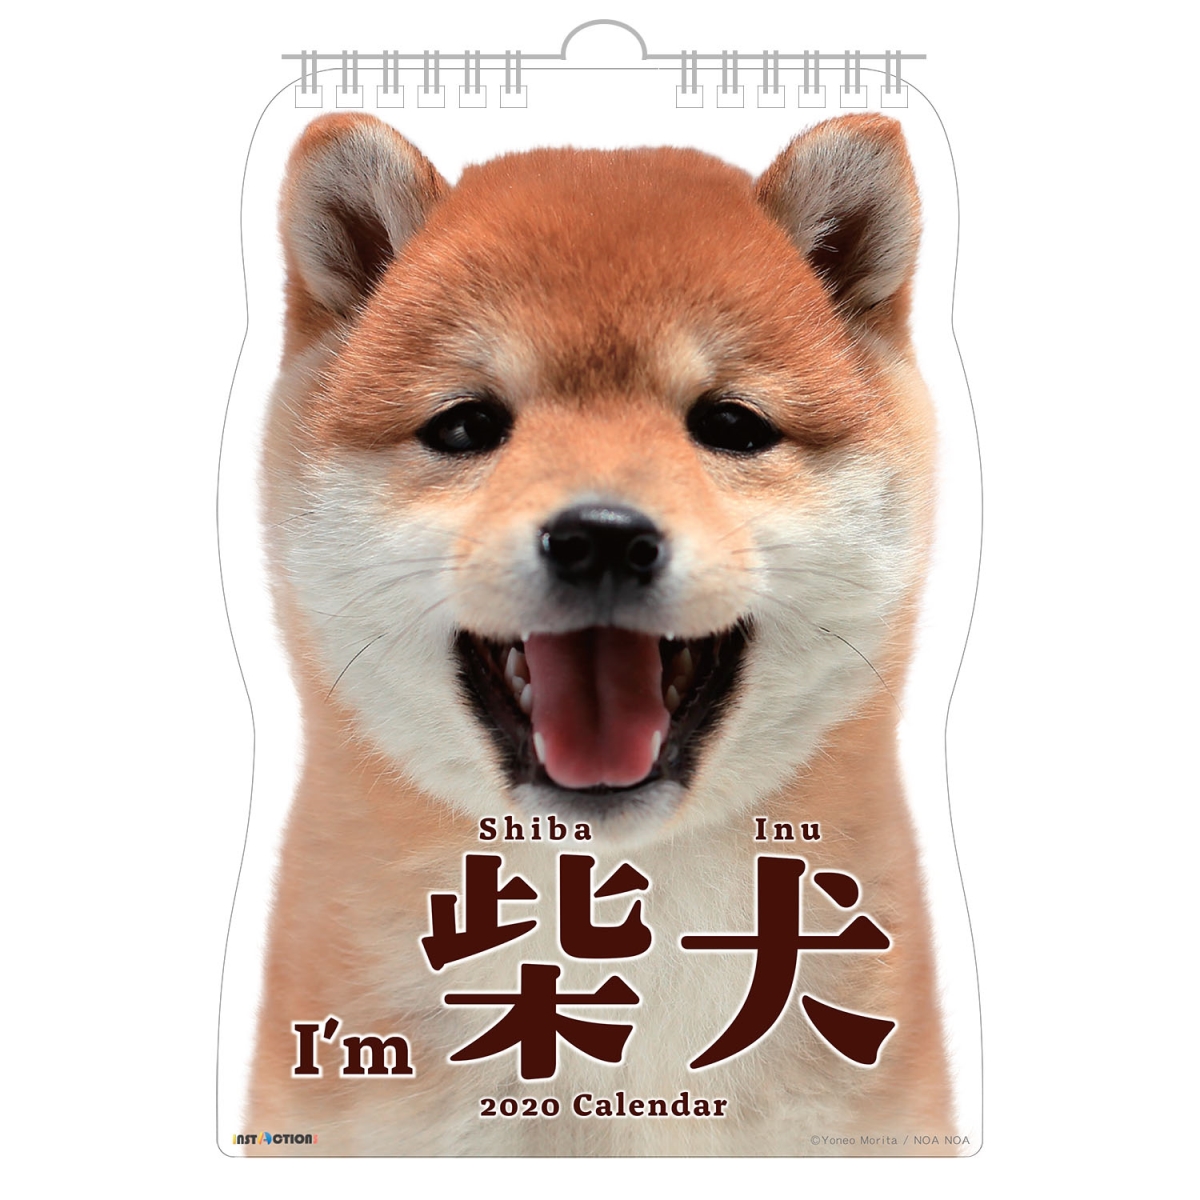 Shibainucaldcut2020 Shiba Inu Die-cut 2020 Wall Calendar With Adorable Shiba Dogs Puppies Pictures